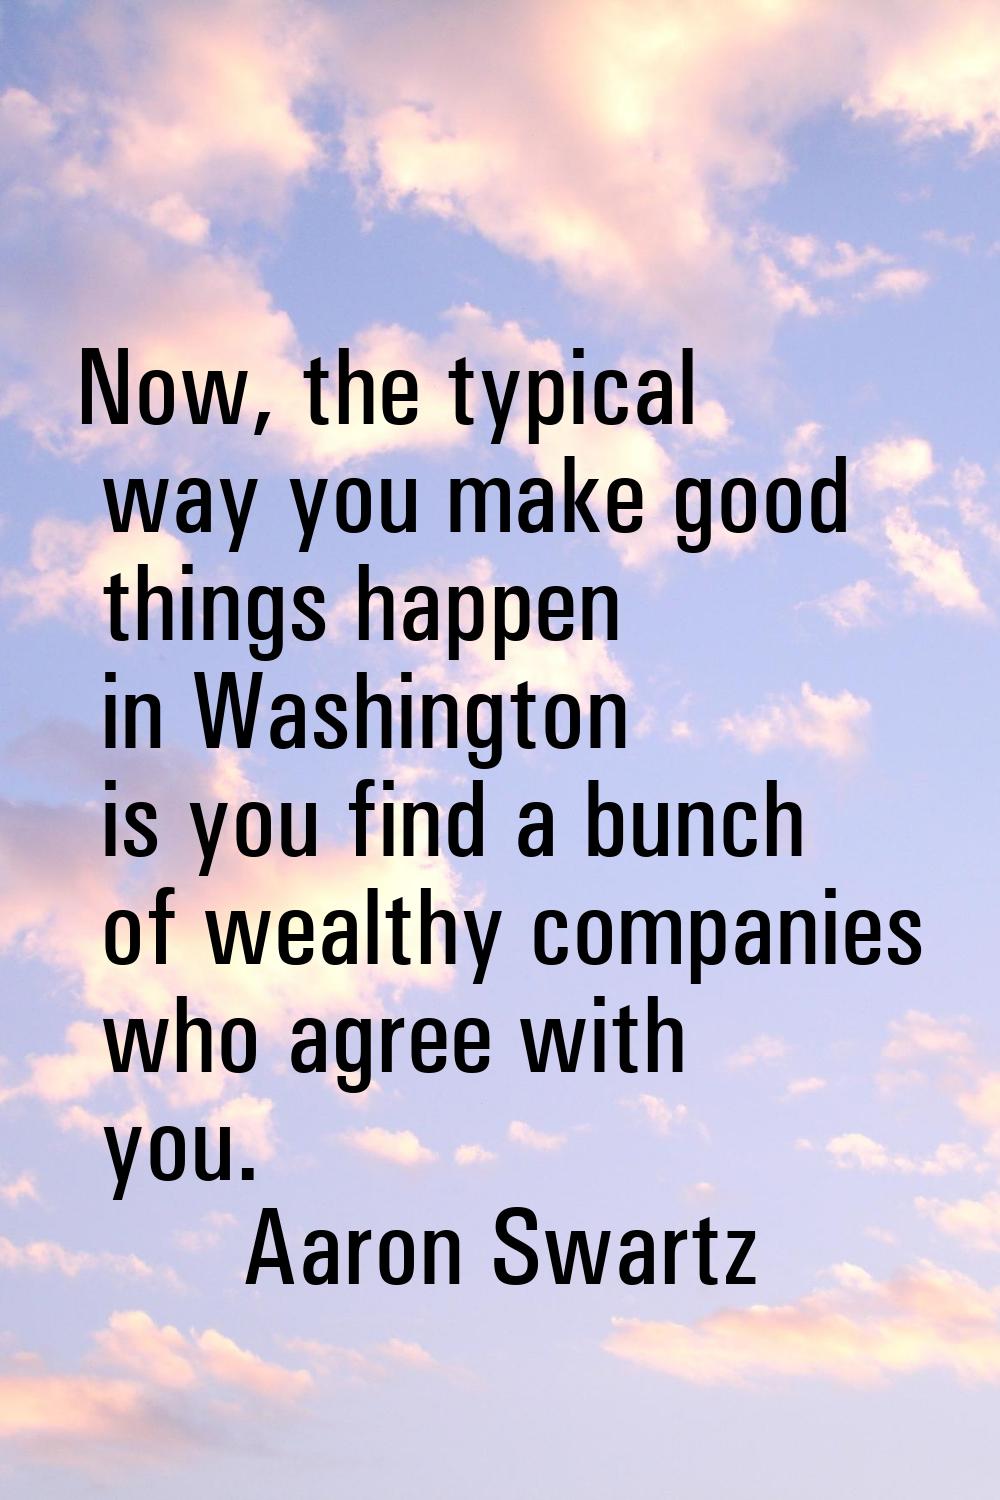 Now, the typical way you make good things happen in Washington is you find a bunch of wealthy compa